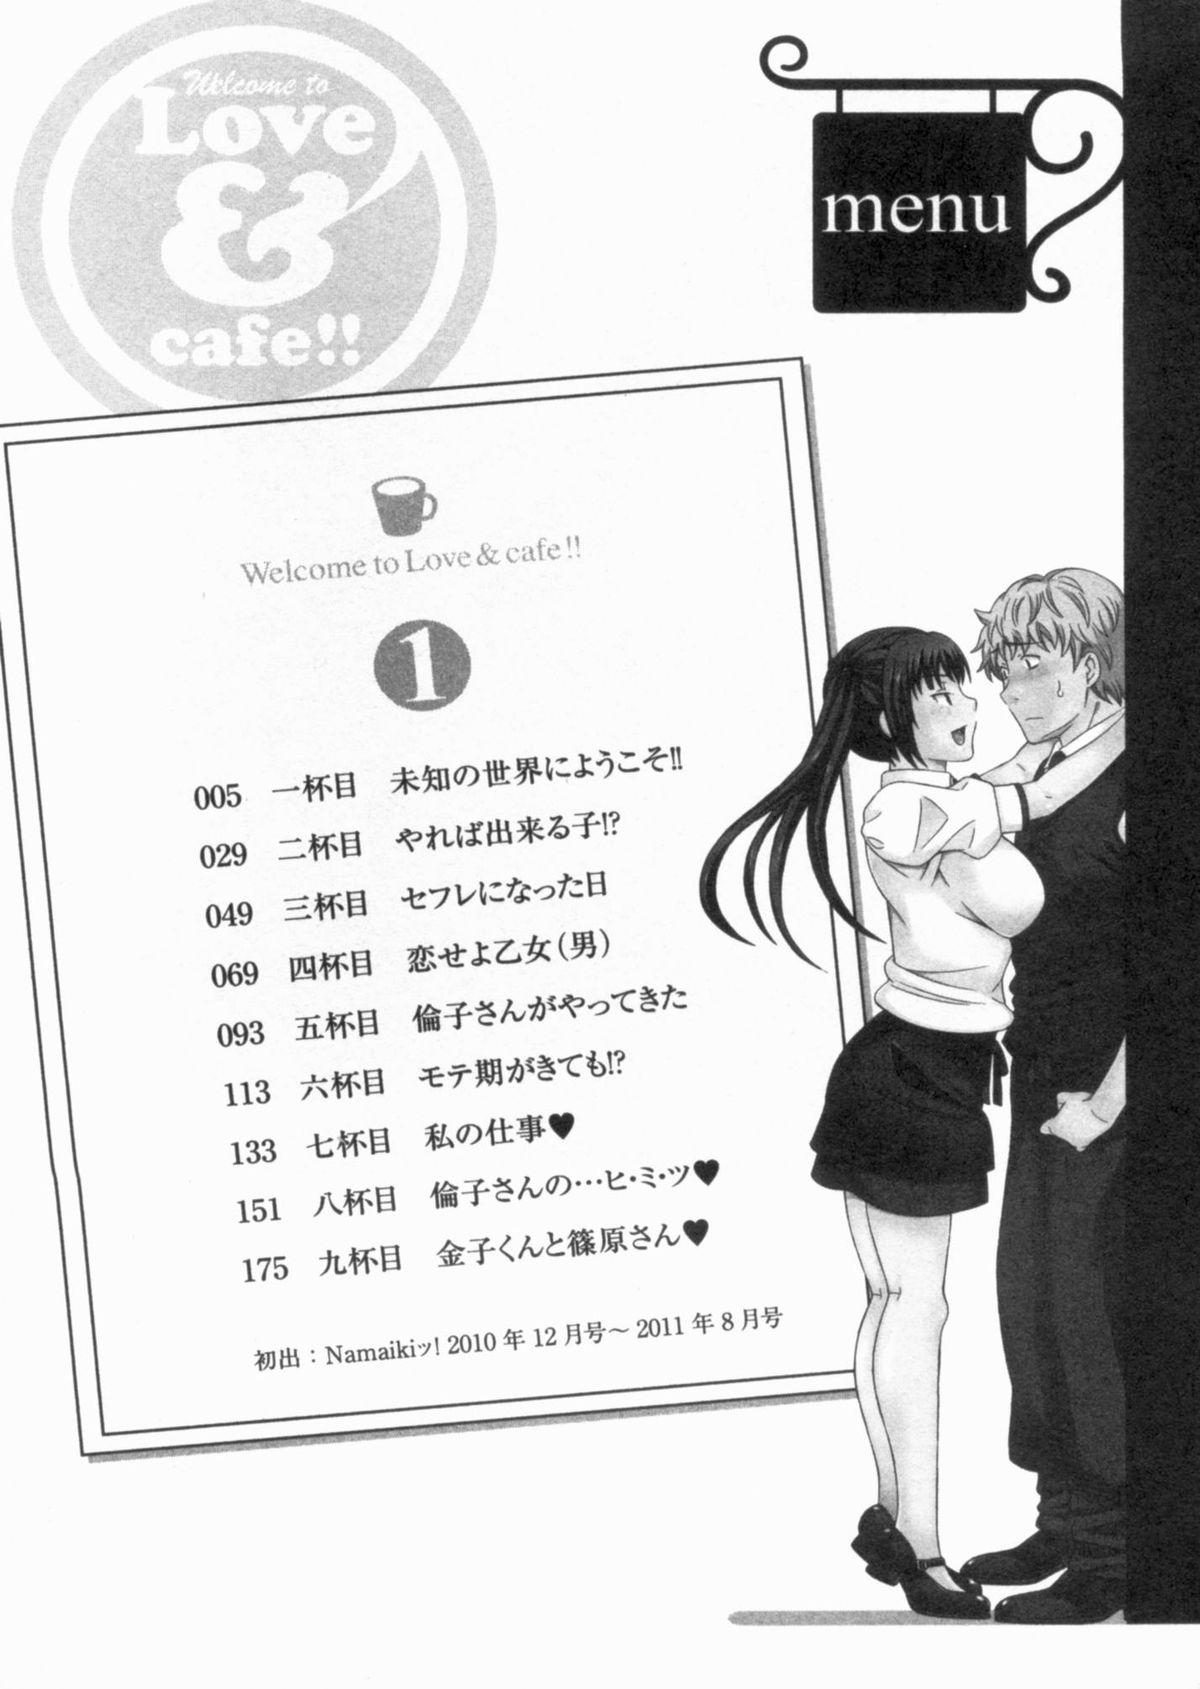 Asians Koi Cafe ni Youkoso!! 1 - Welcome to Love&cafe!! 1 Double Blowjob - Page 6